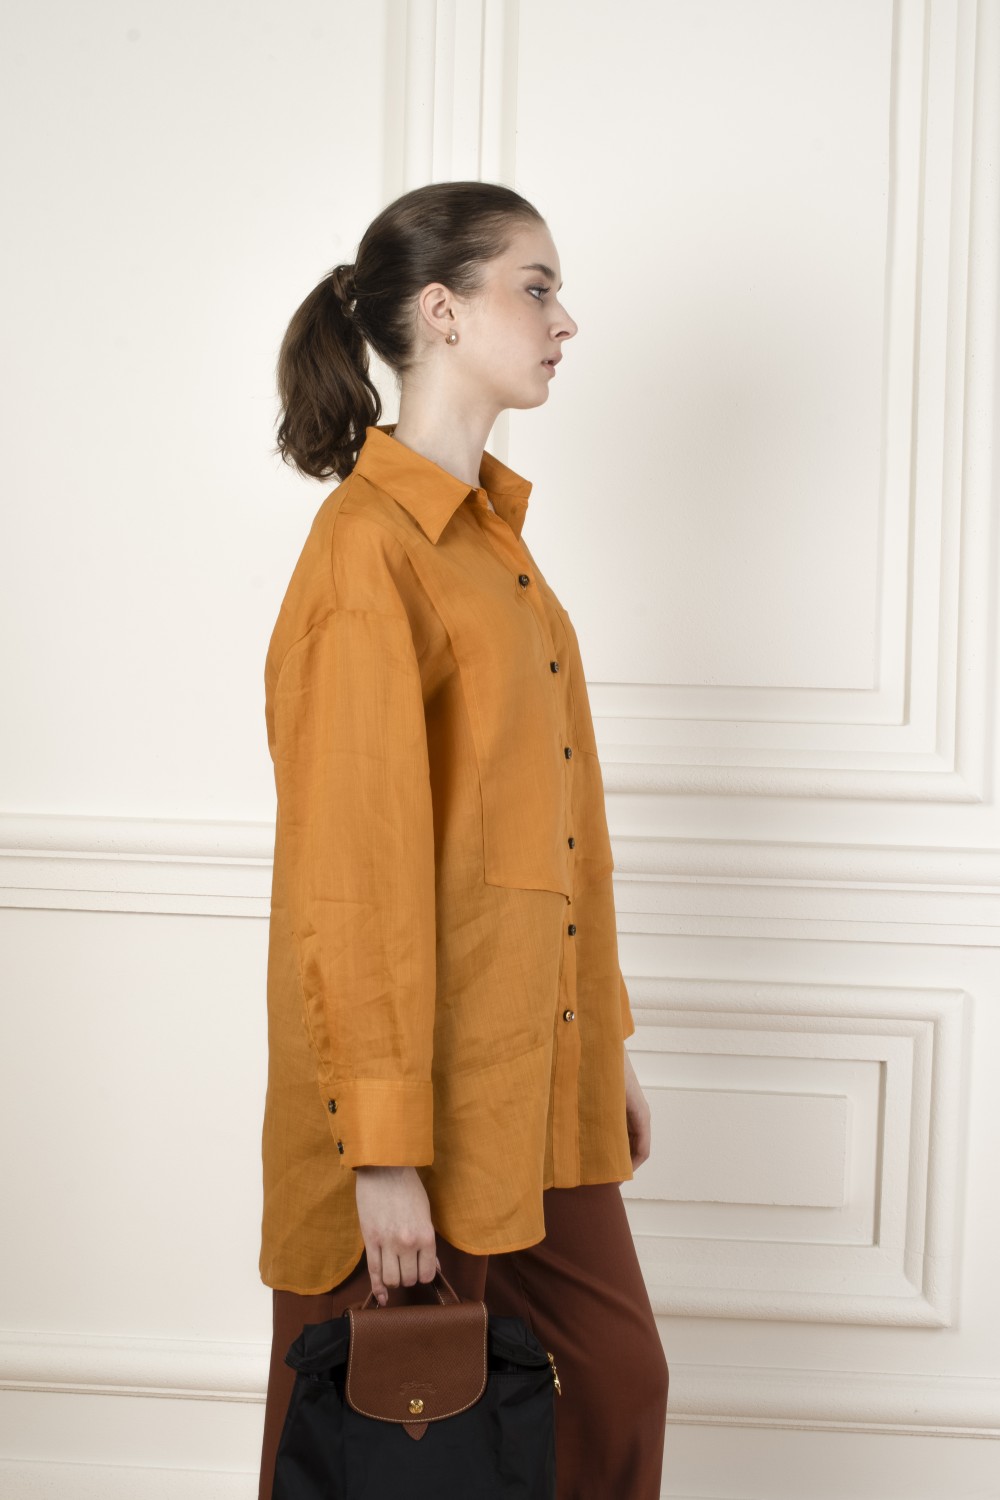 Ivling linen shirt with patch pockets